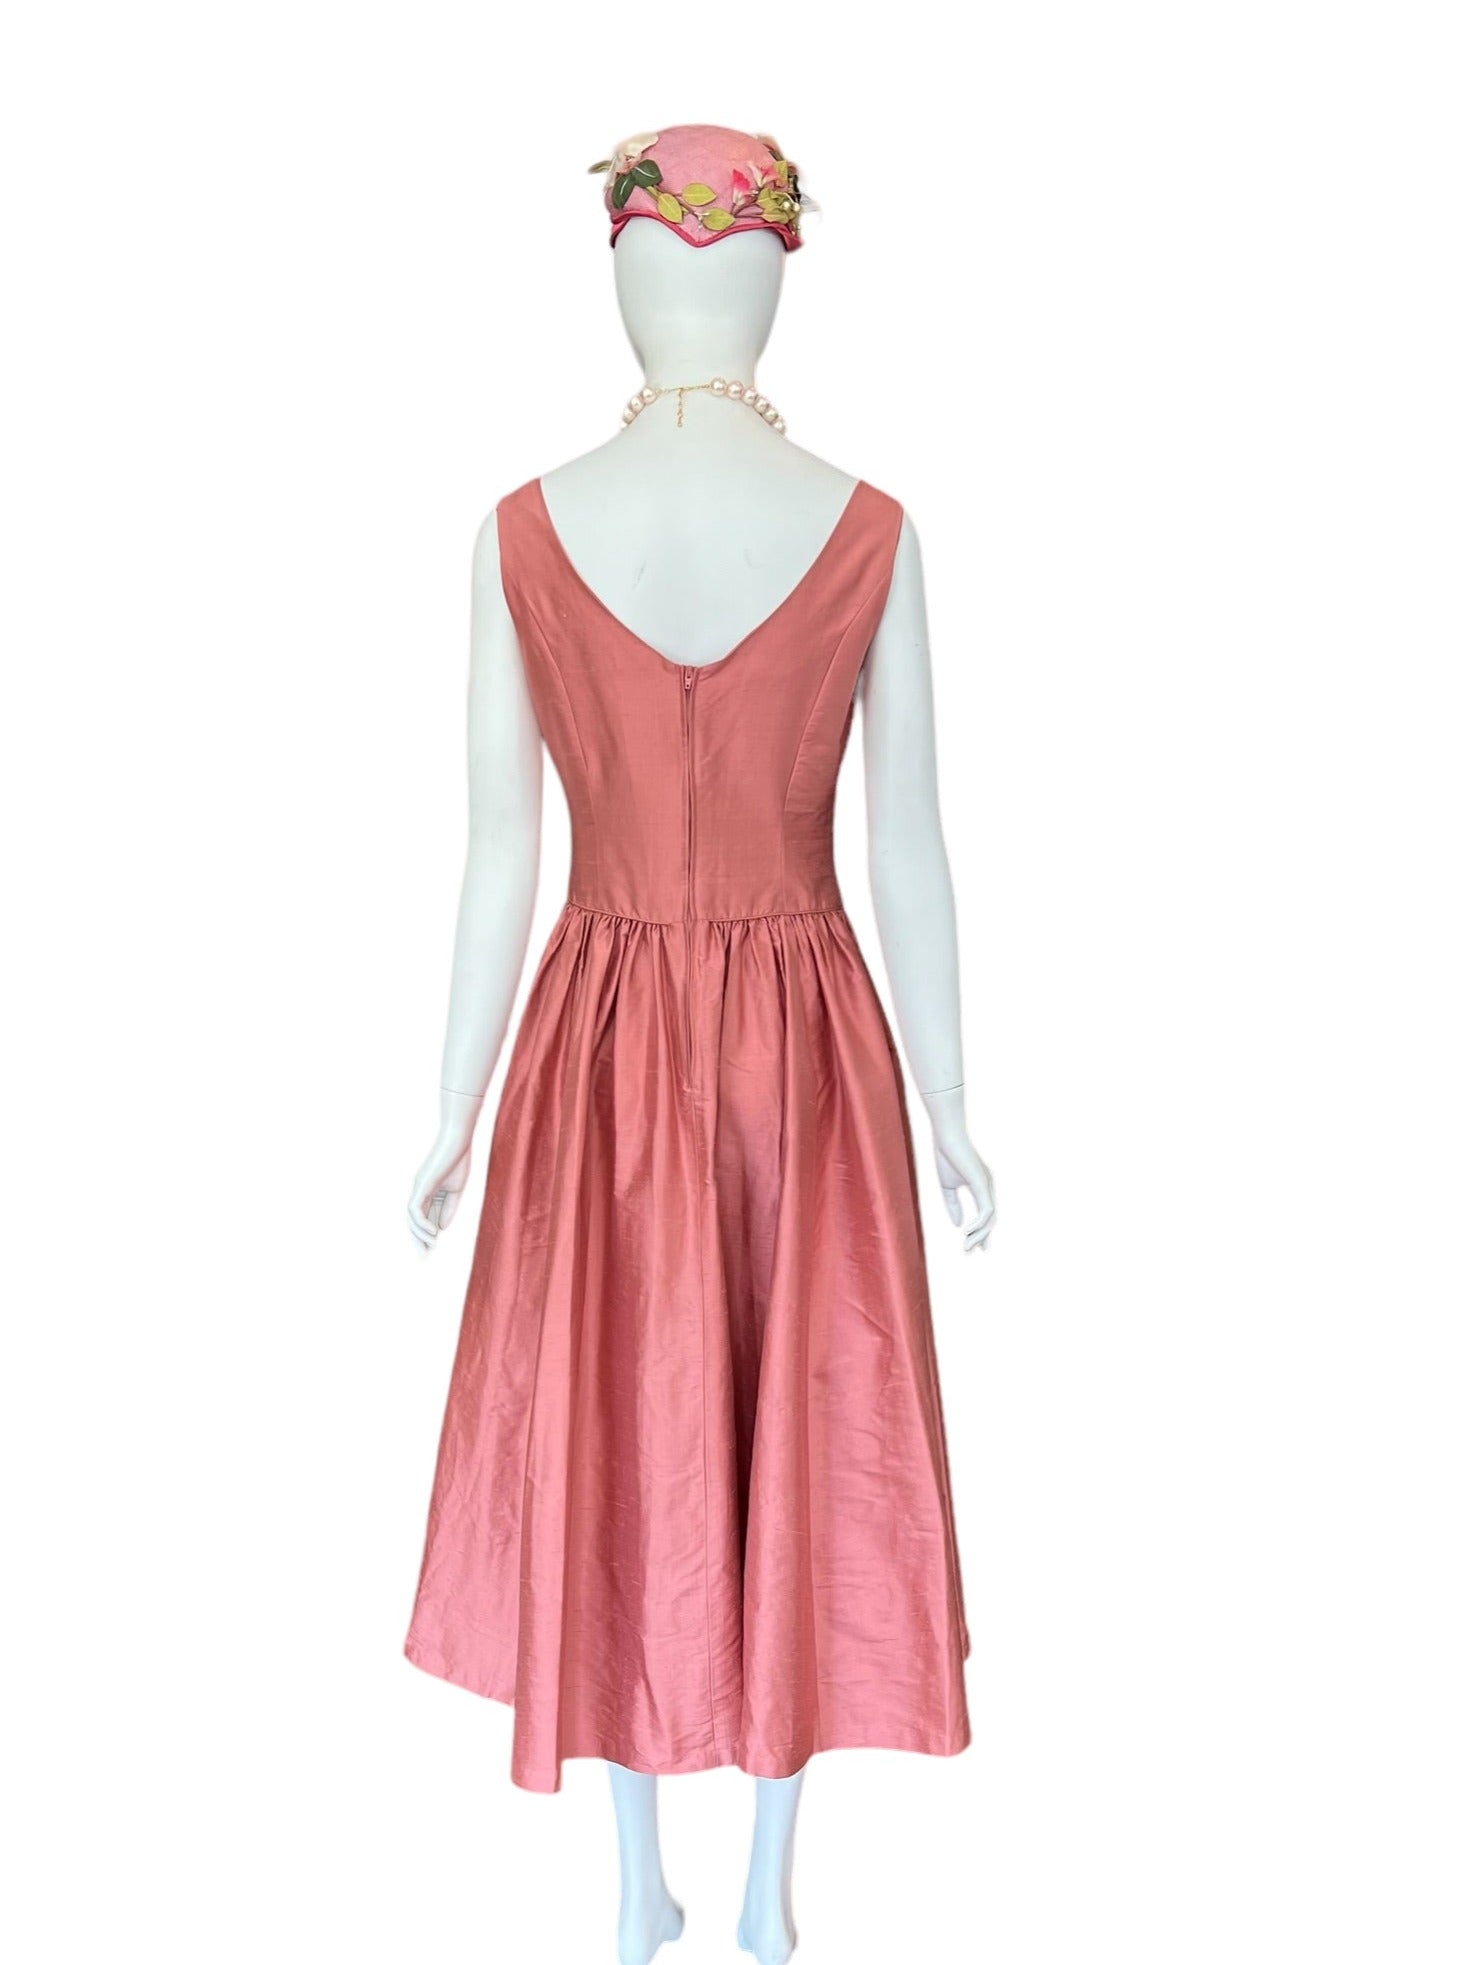 VINTAGE LAURA ASHLEY PARTY DRESS IN DUSTY ROSE FOR WOMEN 100% RAW SILK